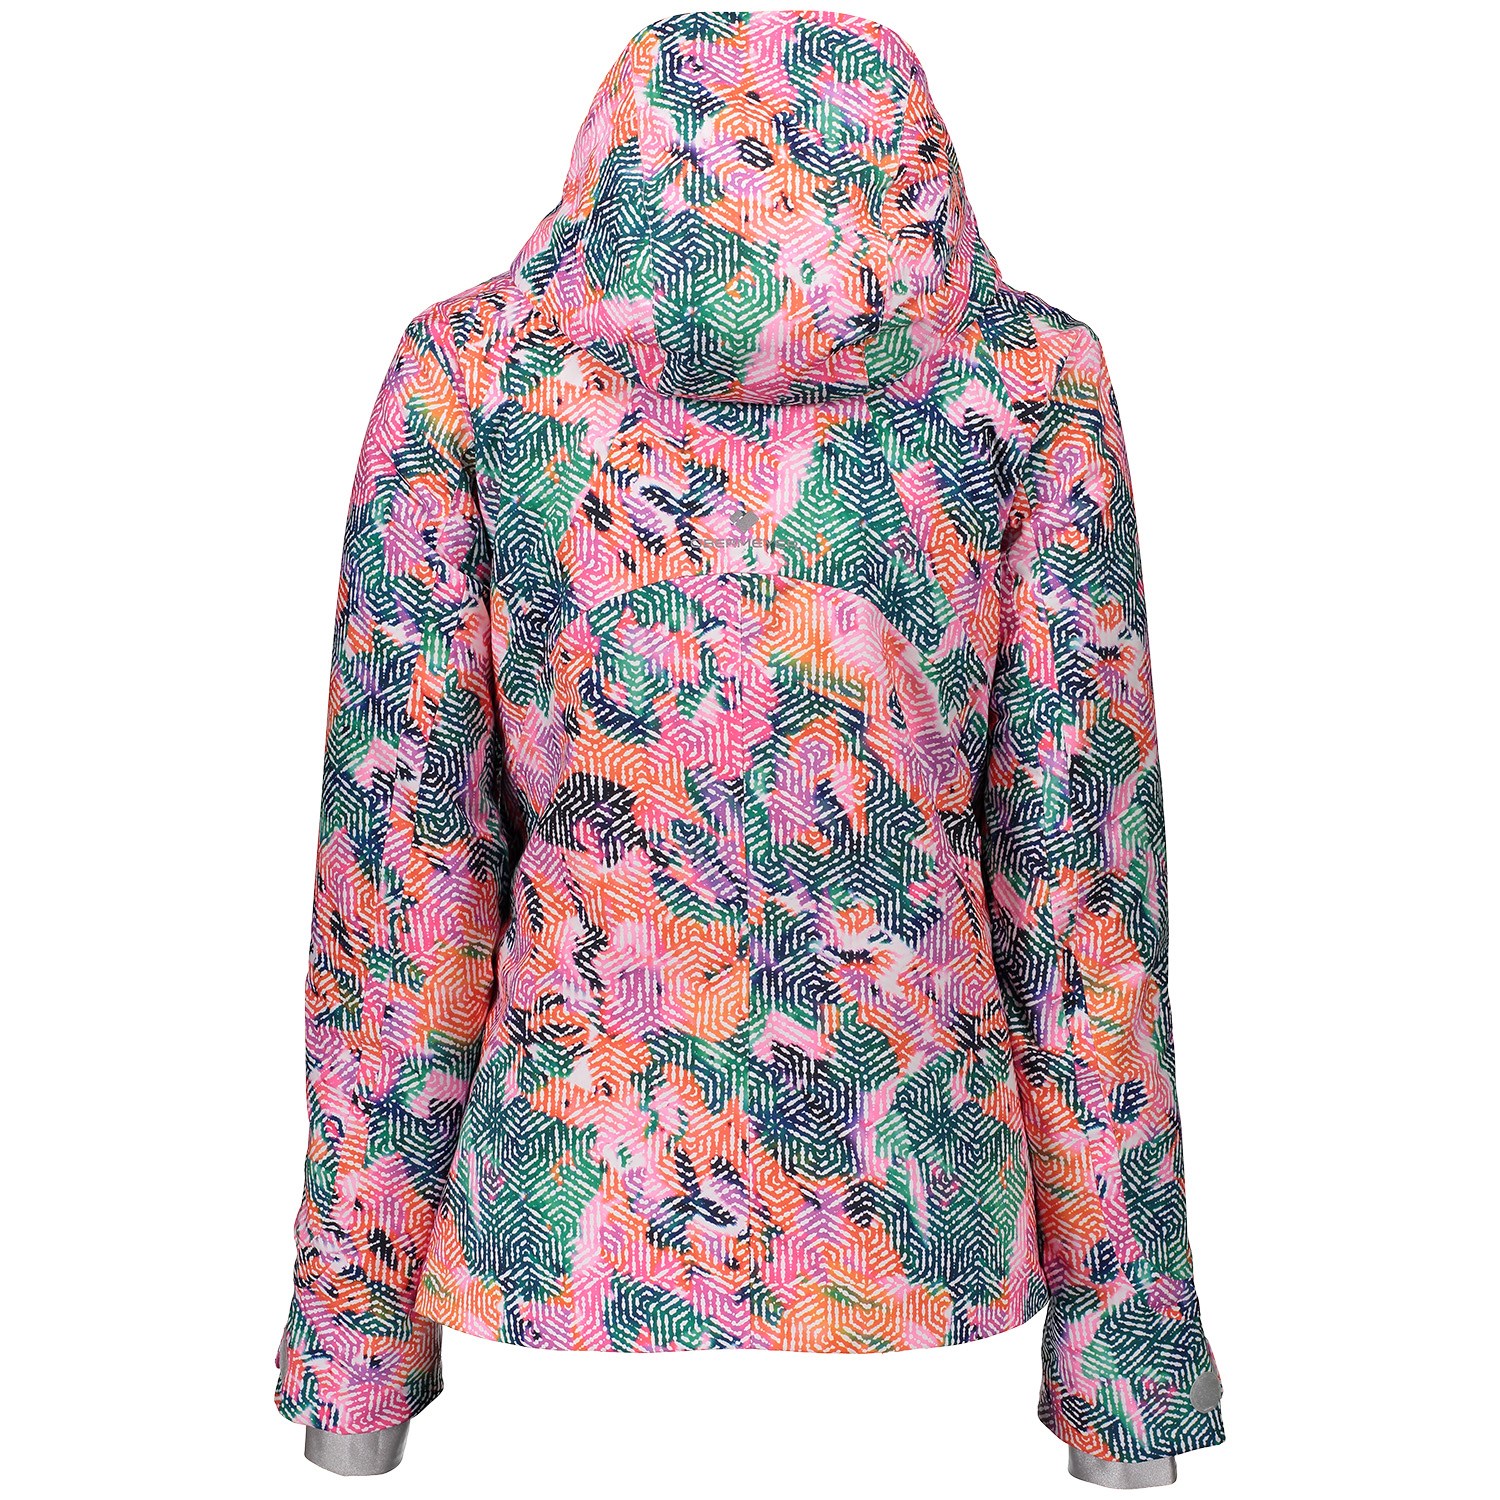 Details about   Obermeyer Womens Jette Jacket Bay and Bloom 2 